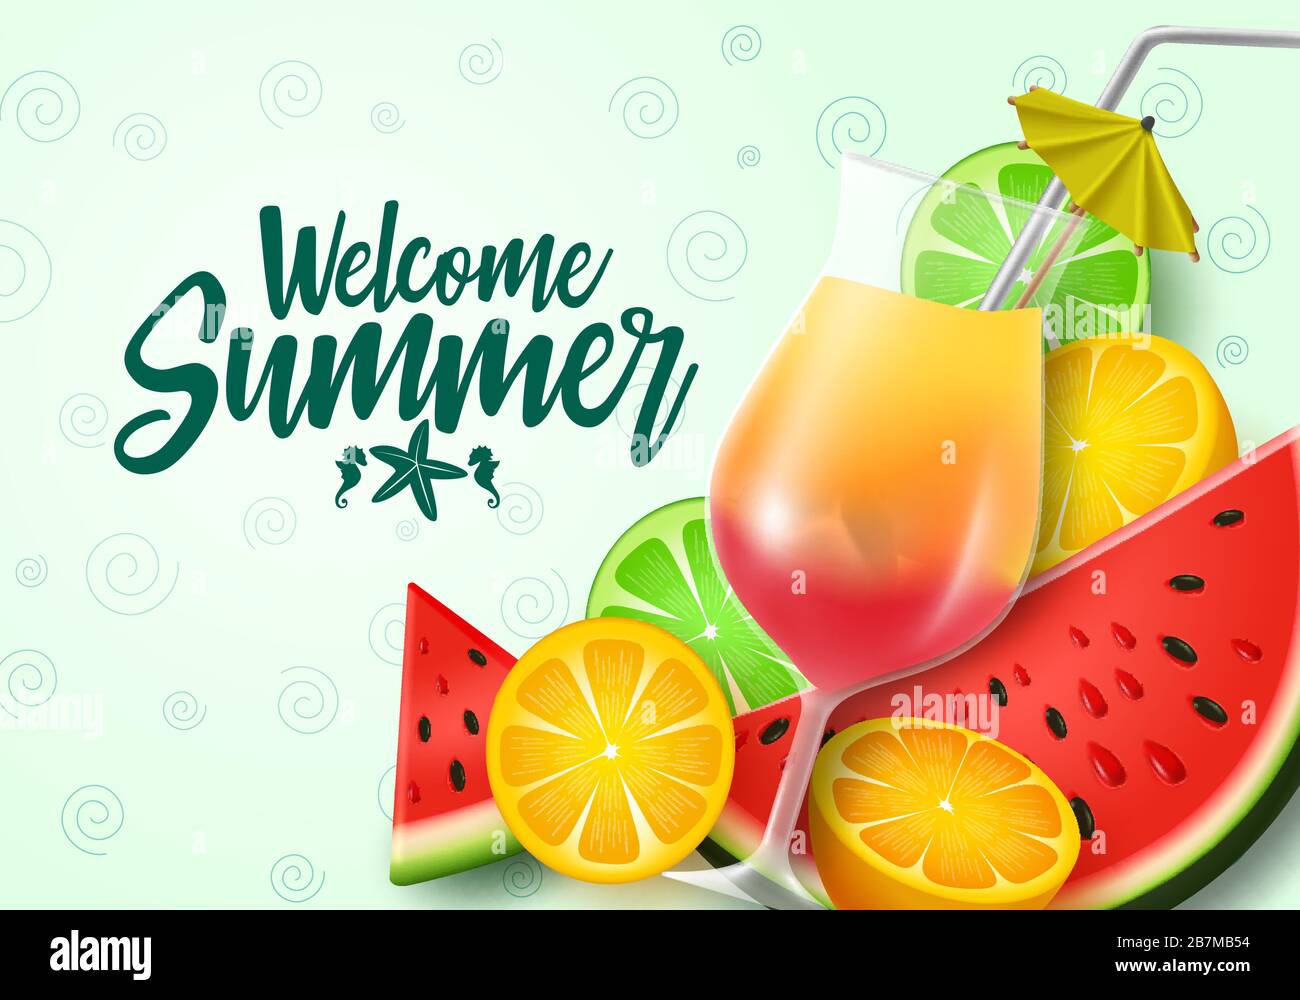 Welcome summer fruits vector banner template. Welcome summer text with tropical fruit element like water melon, orange and calamansi with fresh juice. Stock Vector